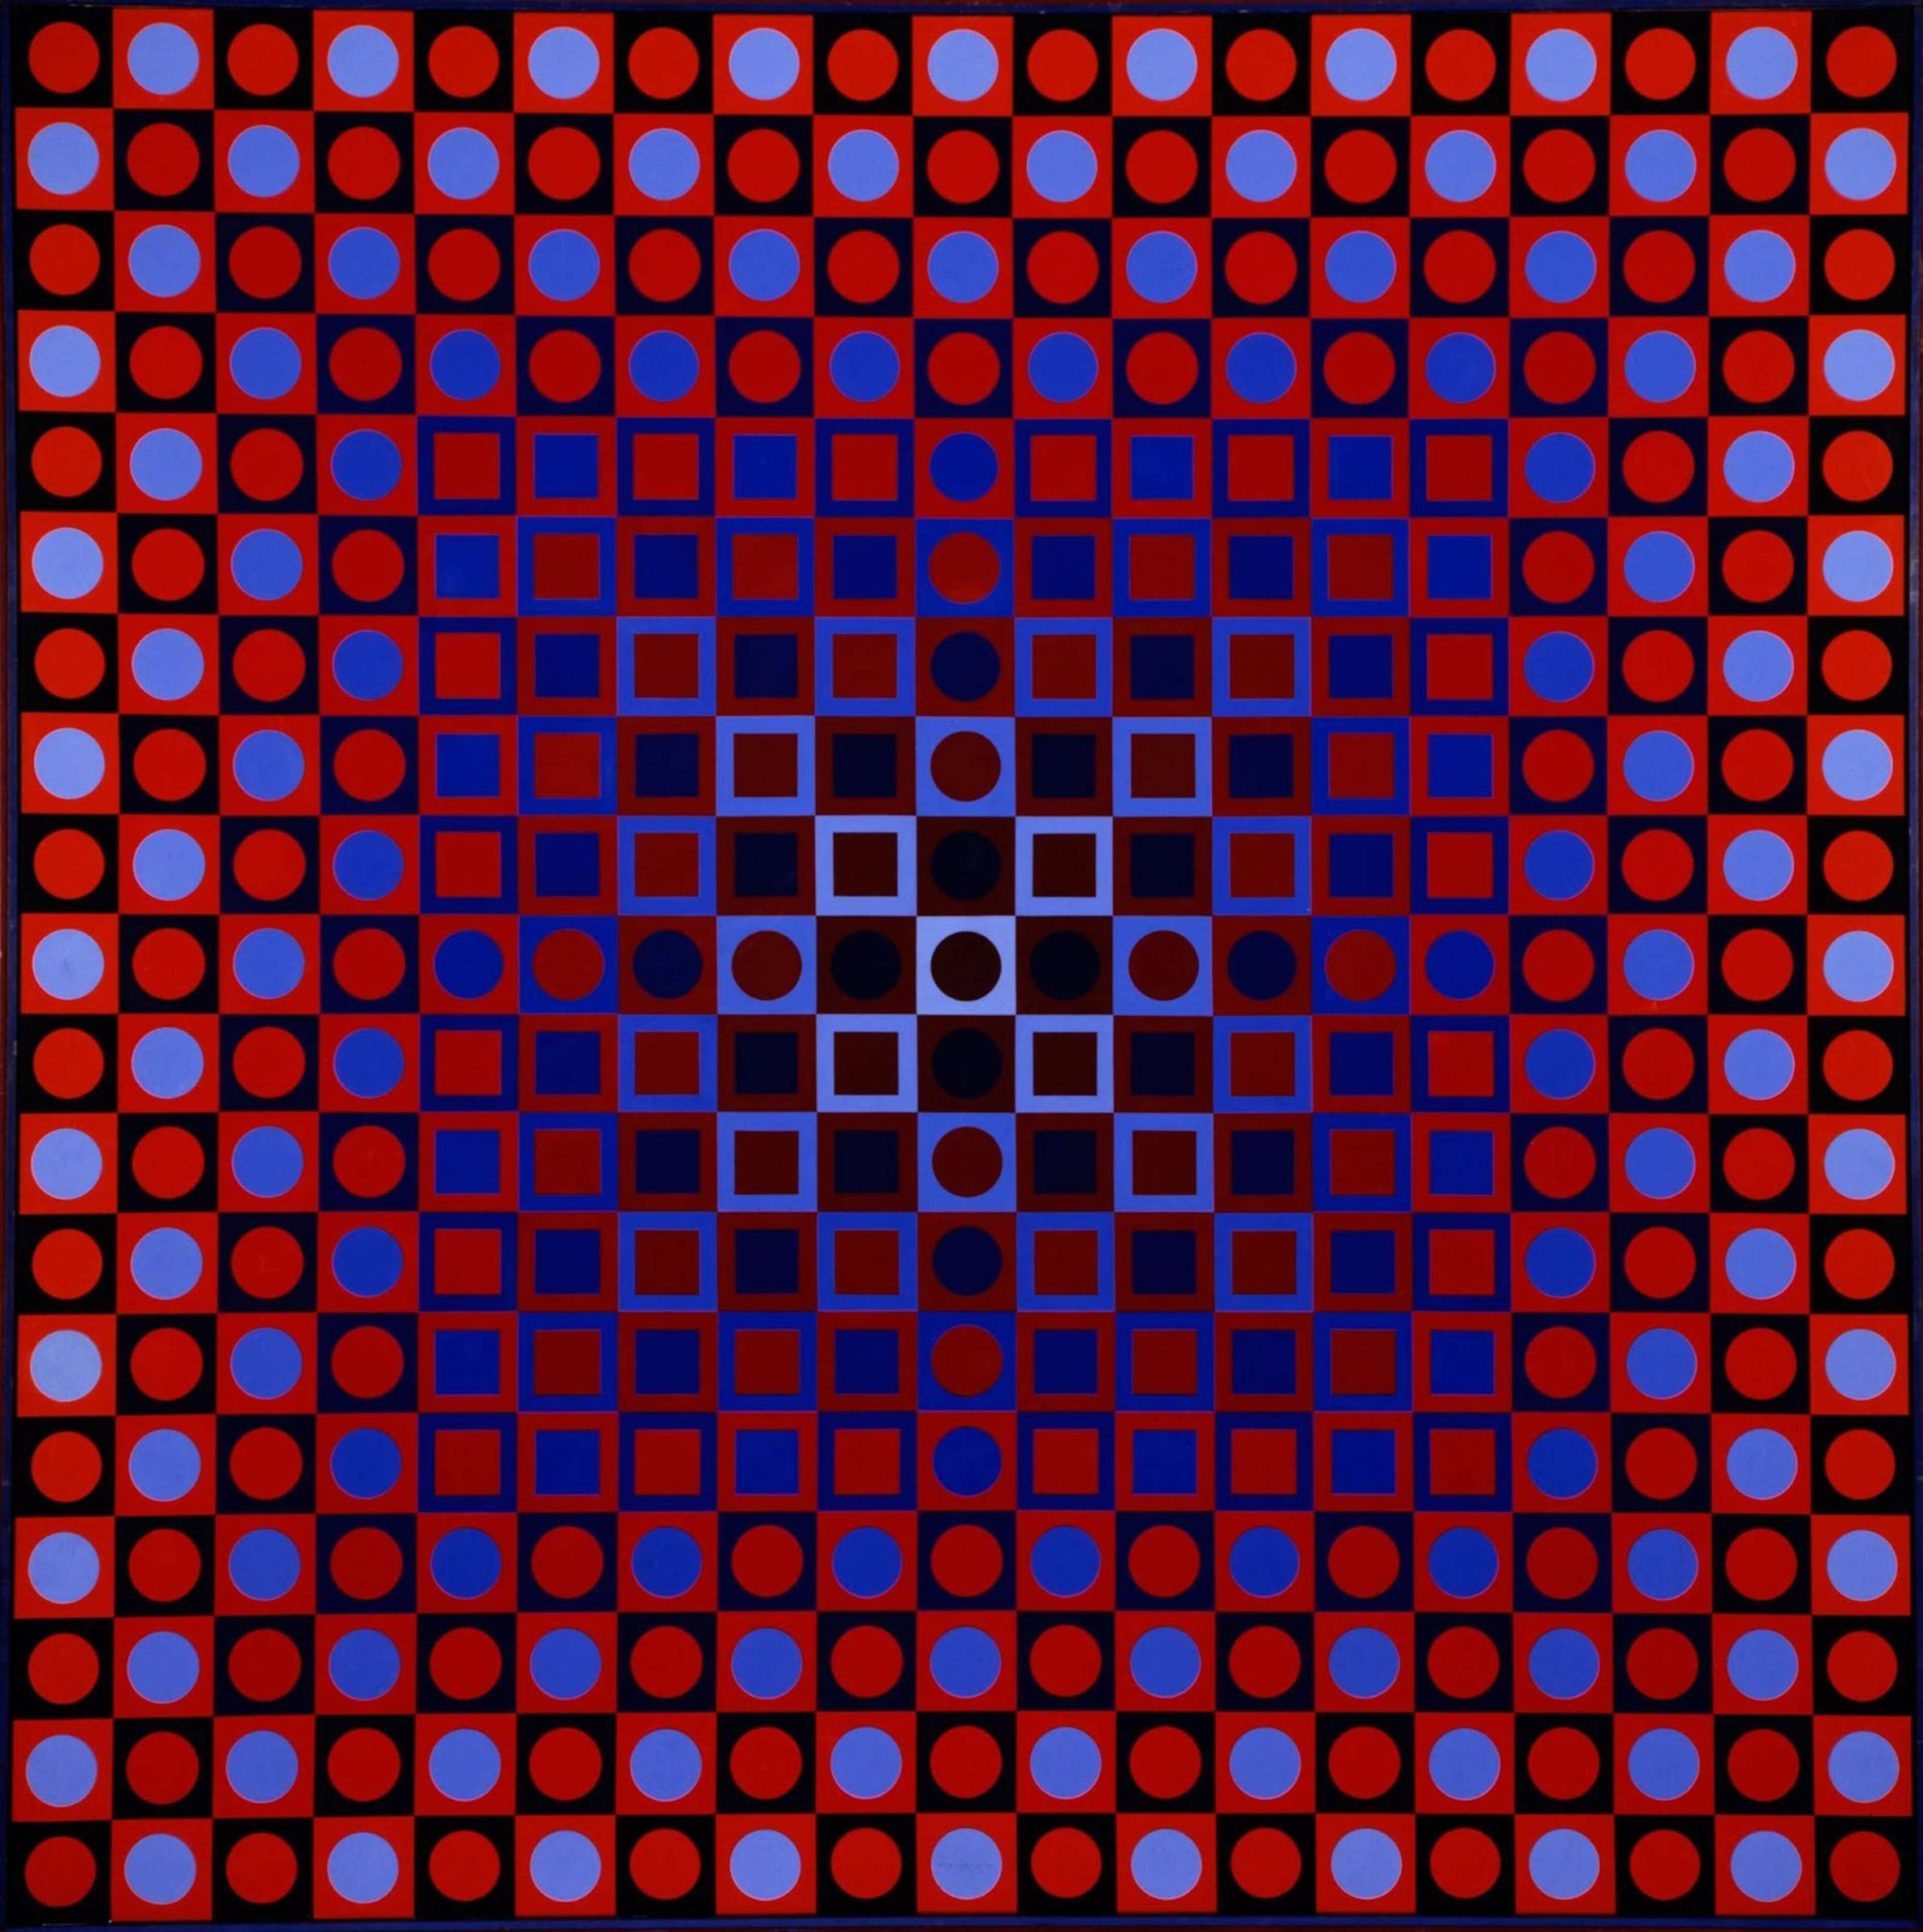 A work composed of red, blue, and purple hues that bleed into each other to create an op art work featuring a repeating pattern of small squares and circles that creates an in-and-out visual effect.